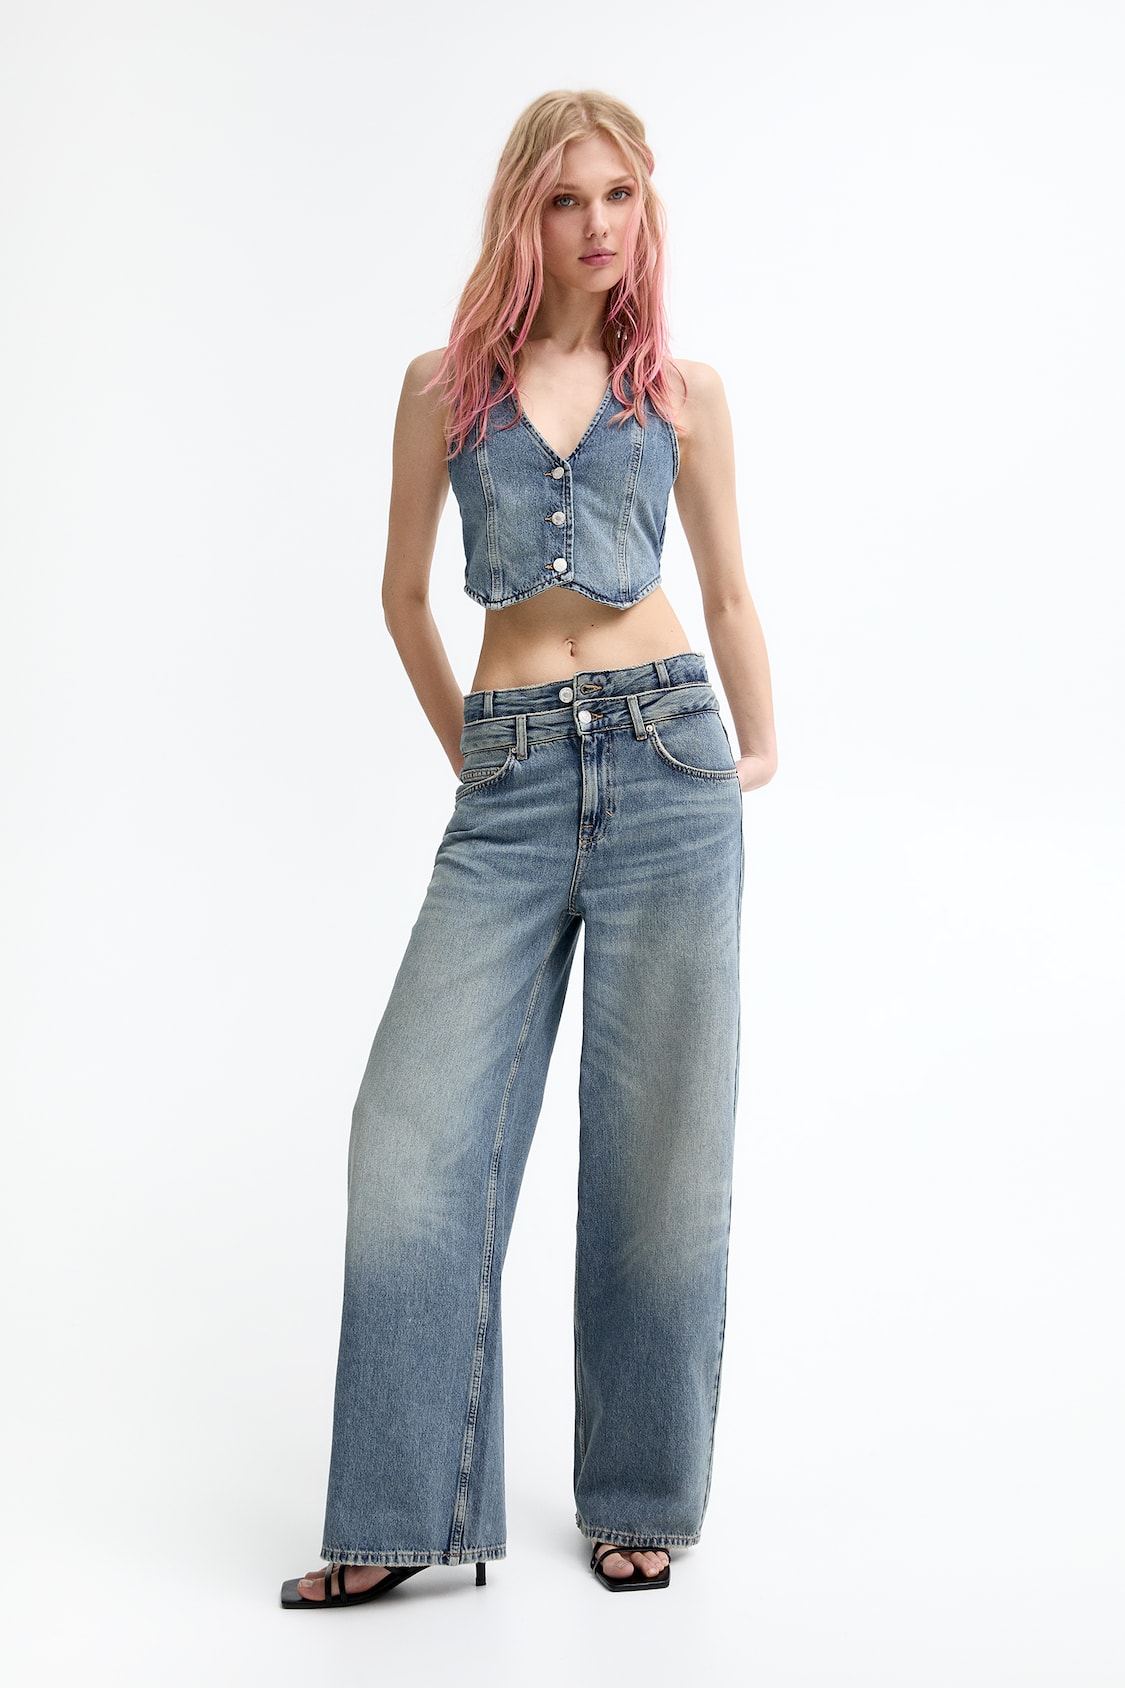 Comfiest pull&bear midrise baggy jeans👖, -Only worn a